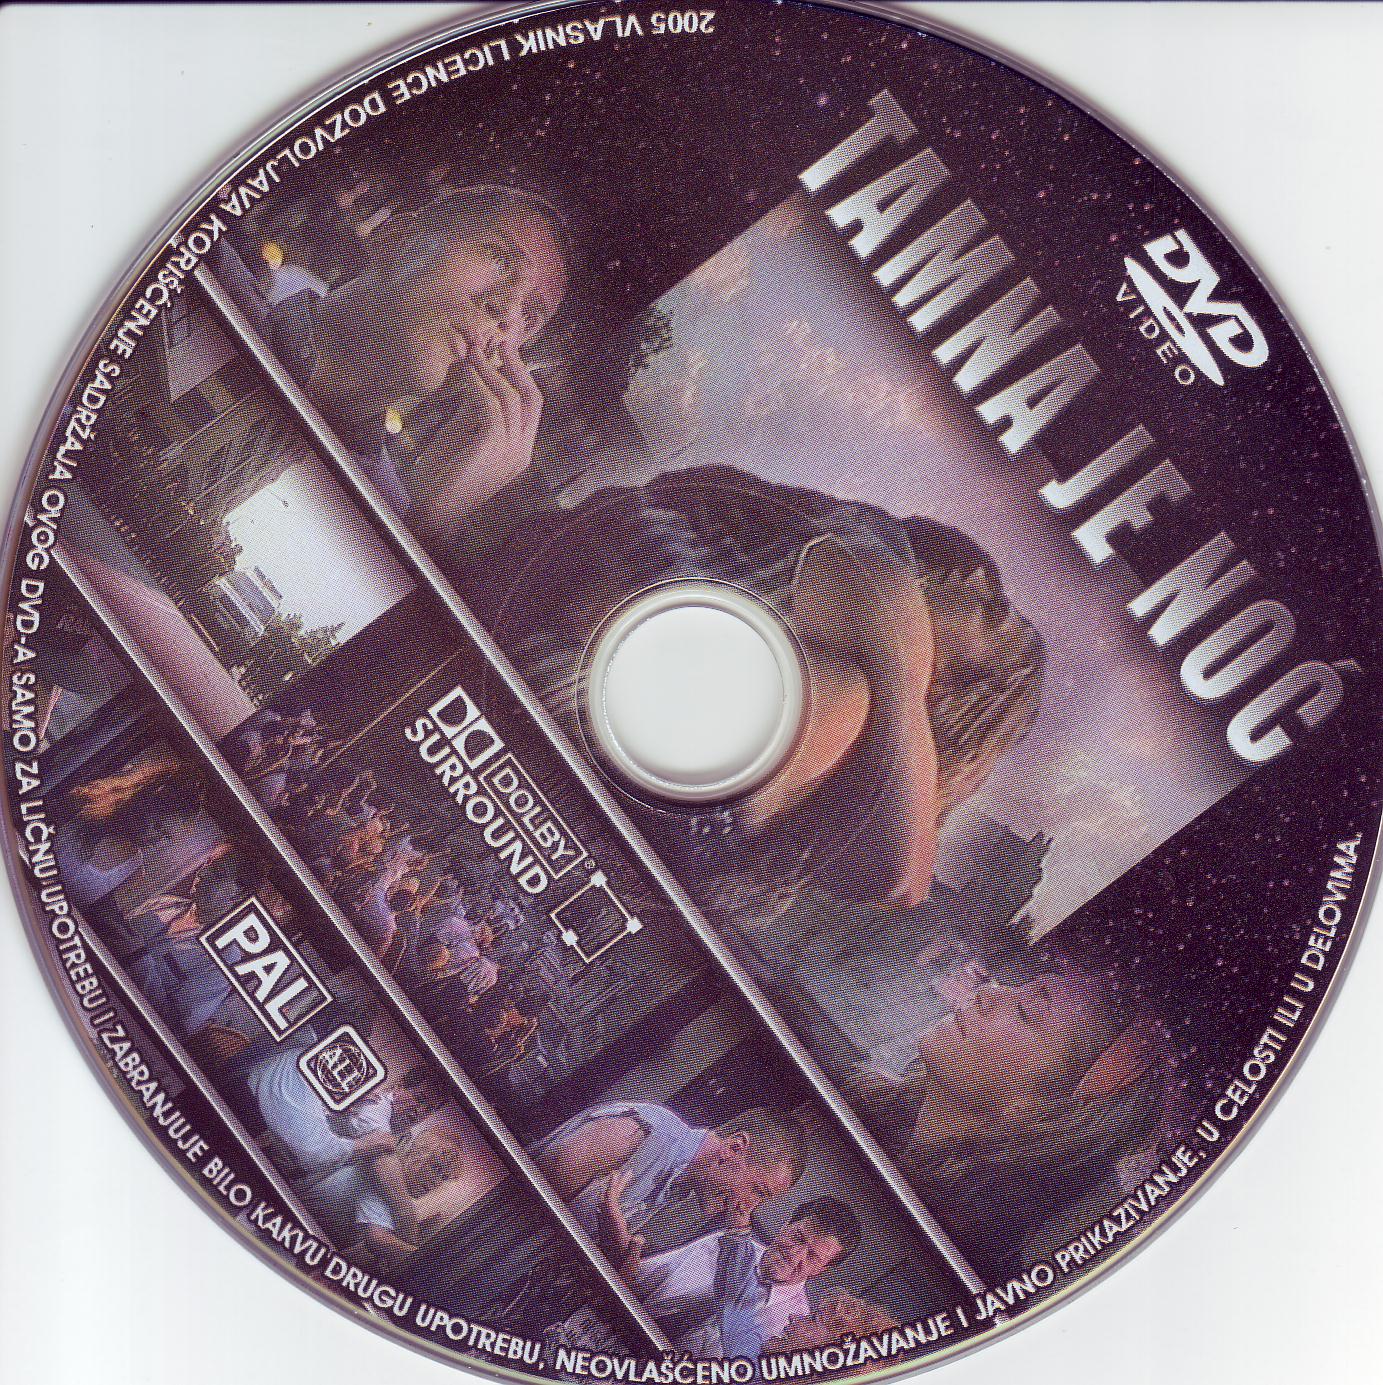 Click to view full size image -  DVD Cover - T - DVD - TAMNA NOC - CD - DVD - TAMNA NOC - CD.JPG